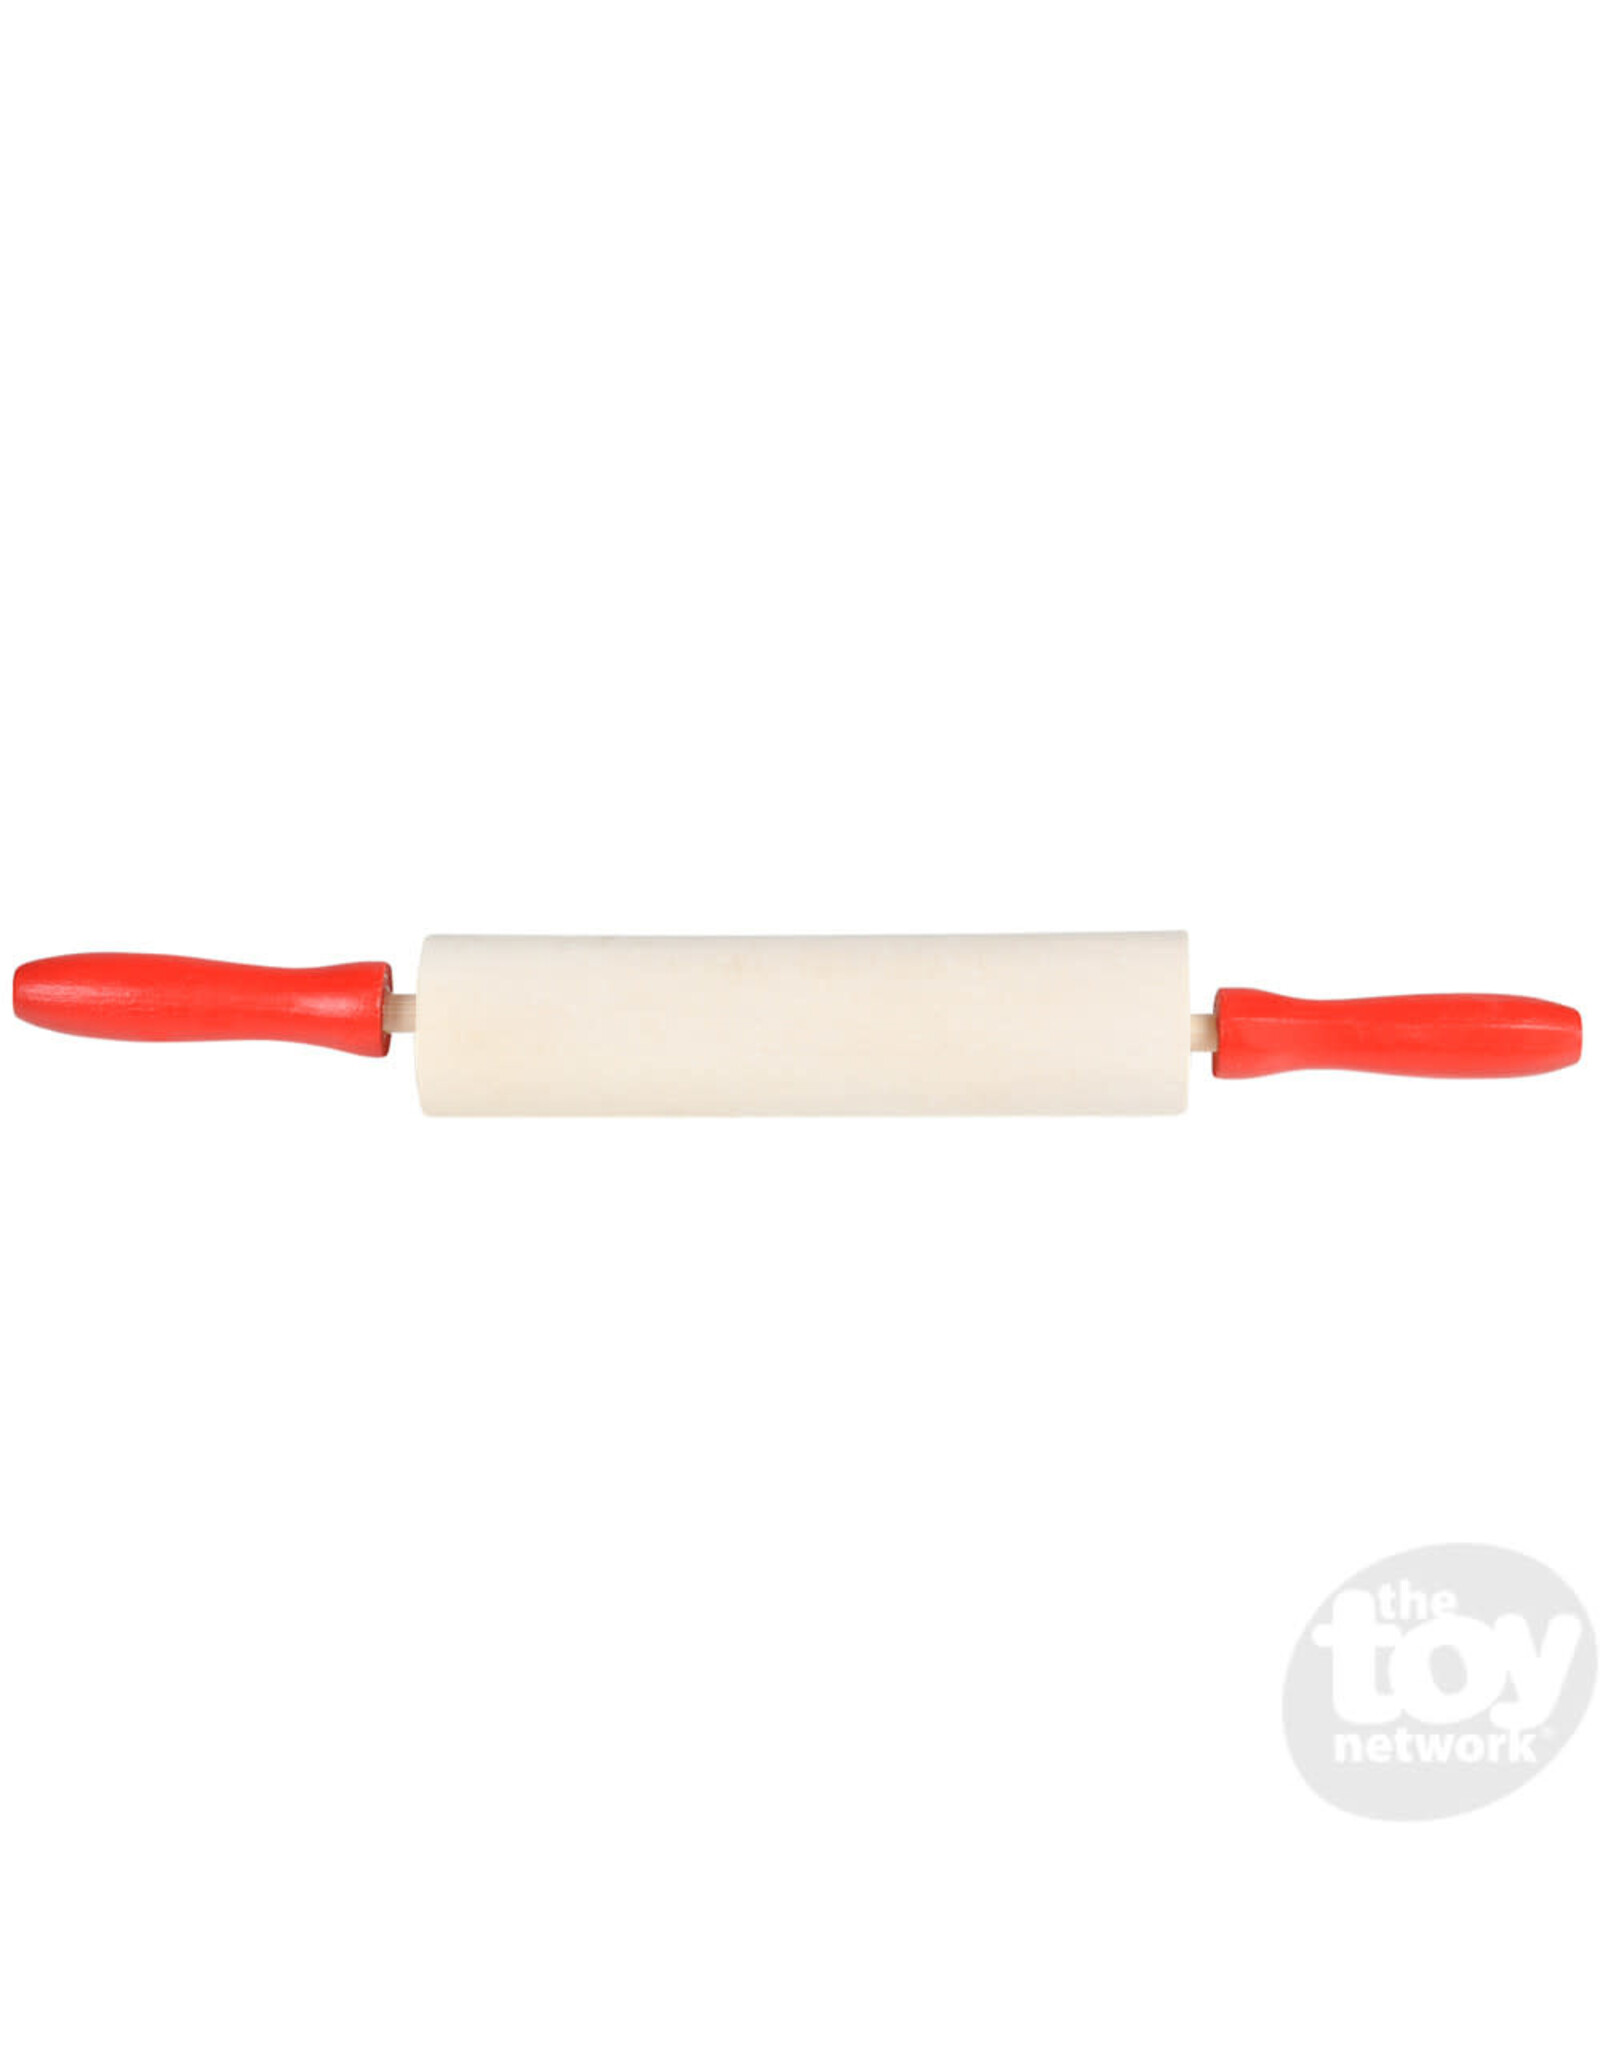 The Toy Network 7.5" Rolling Pin